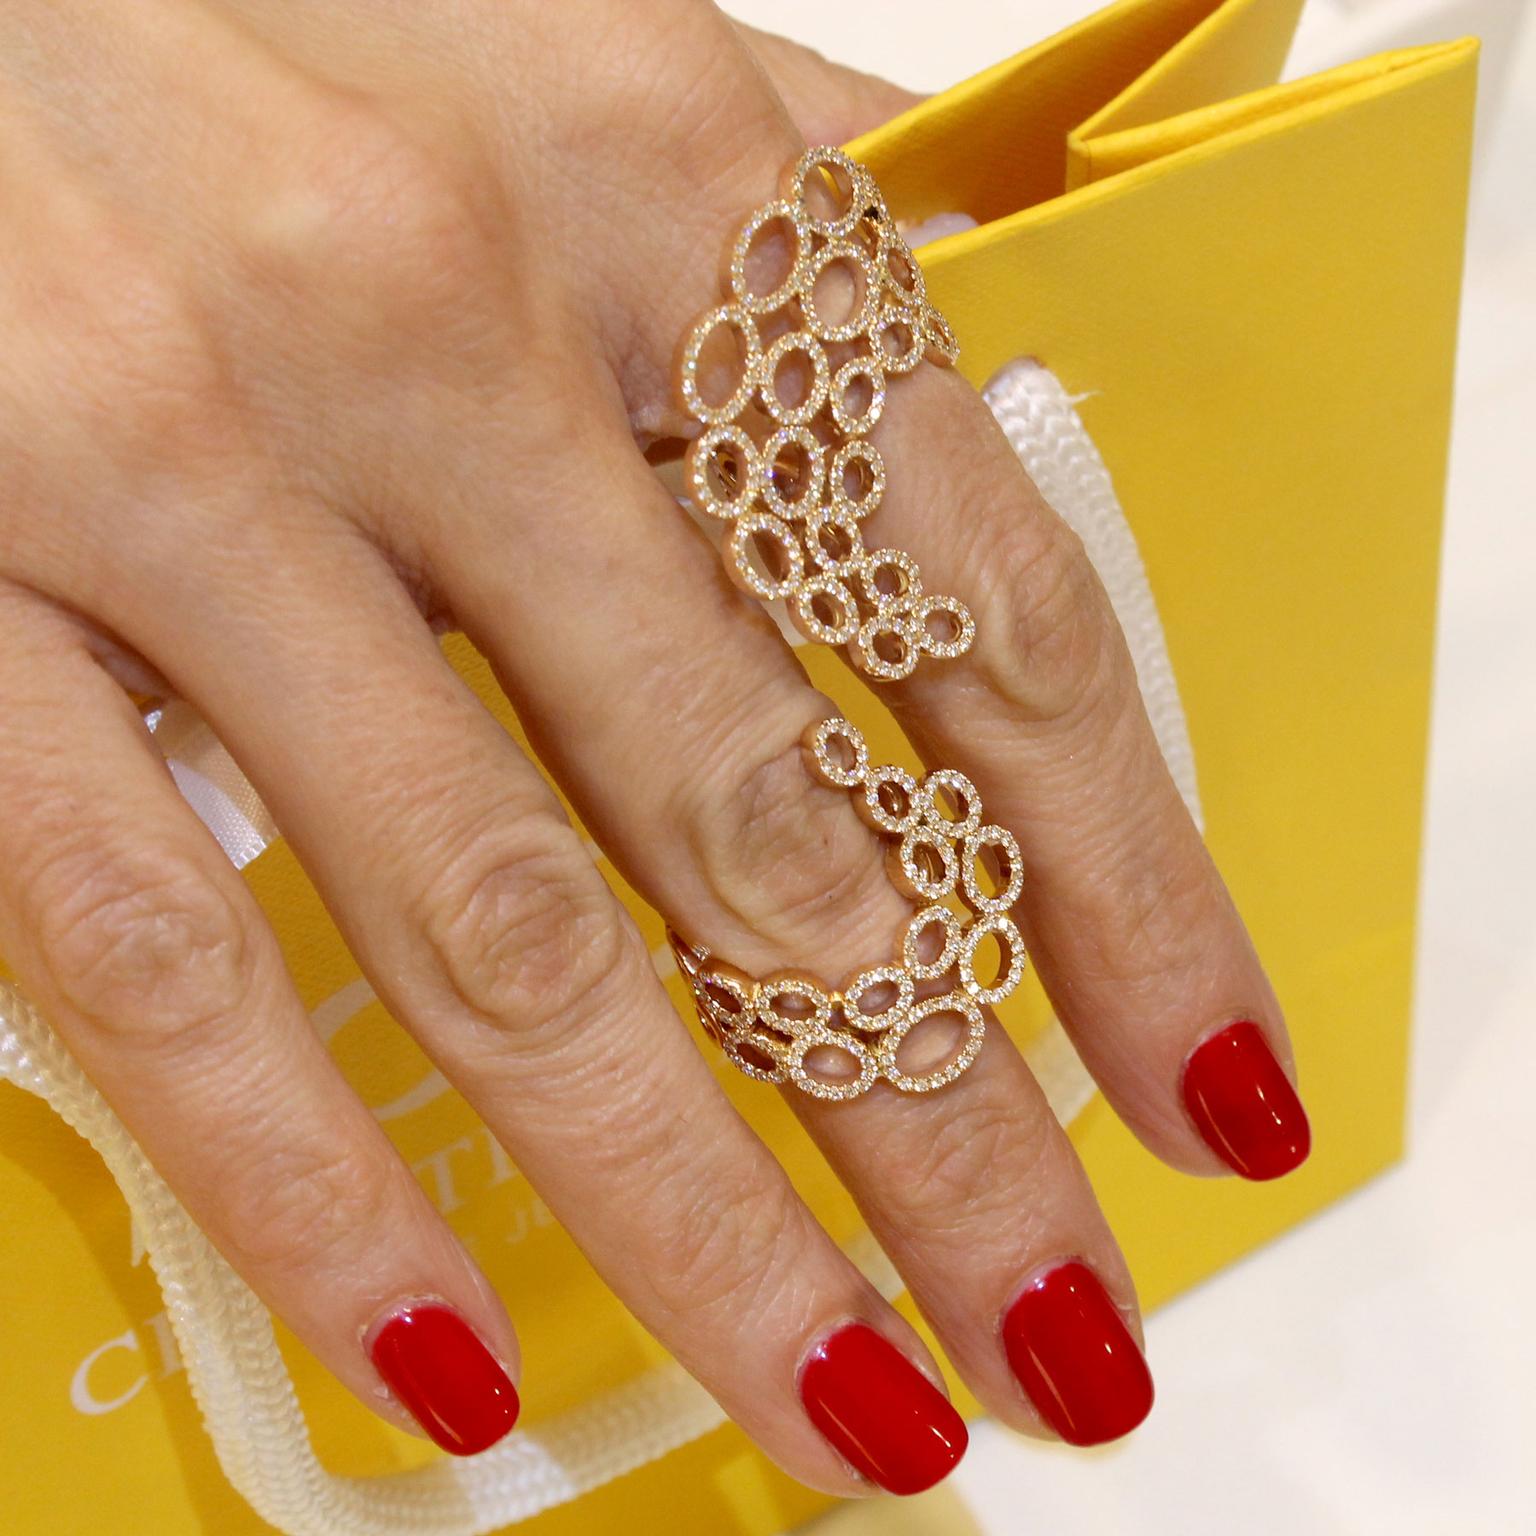 Christina Debs Lace rings